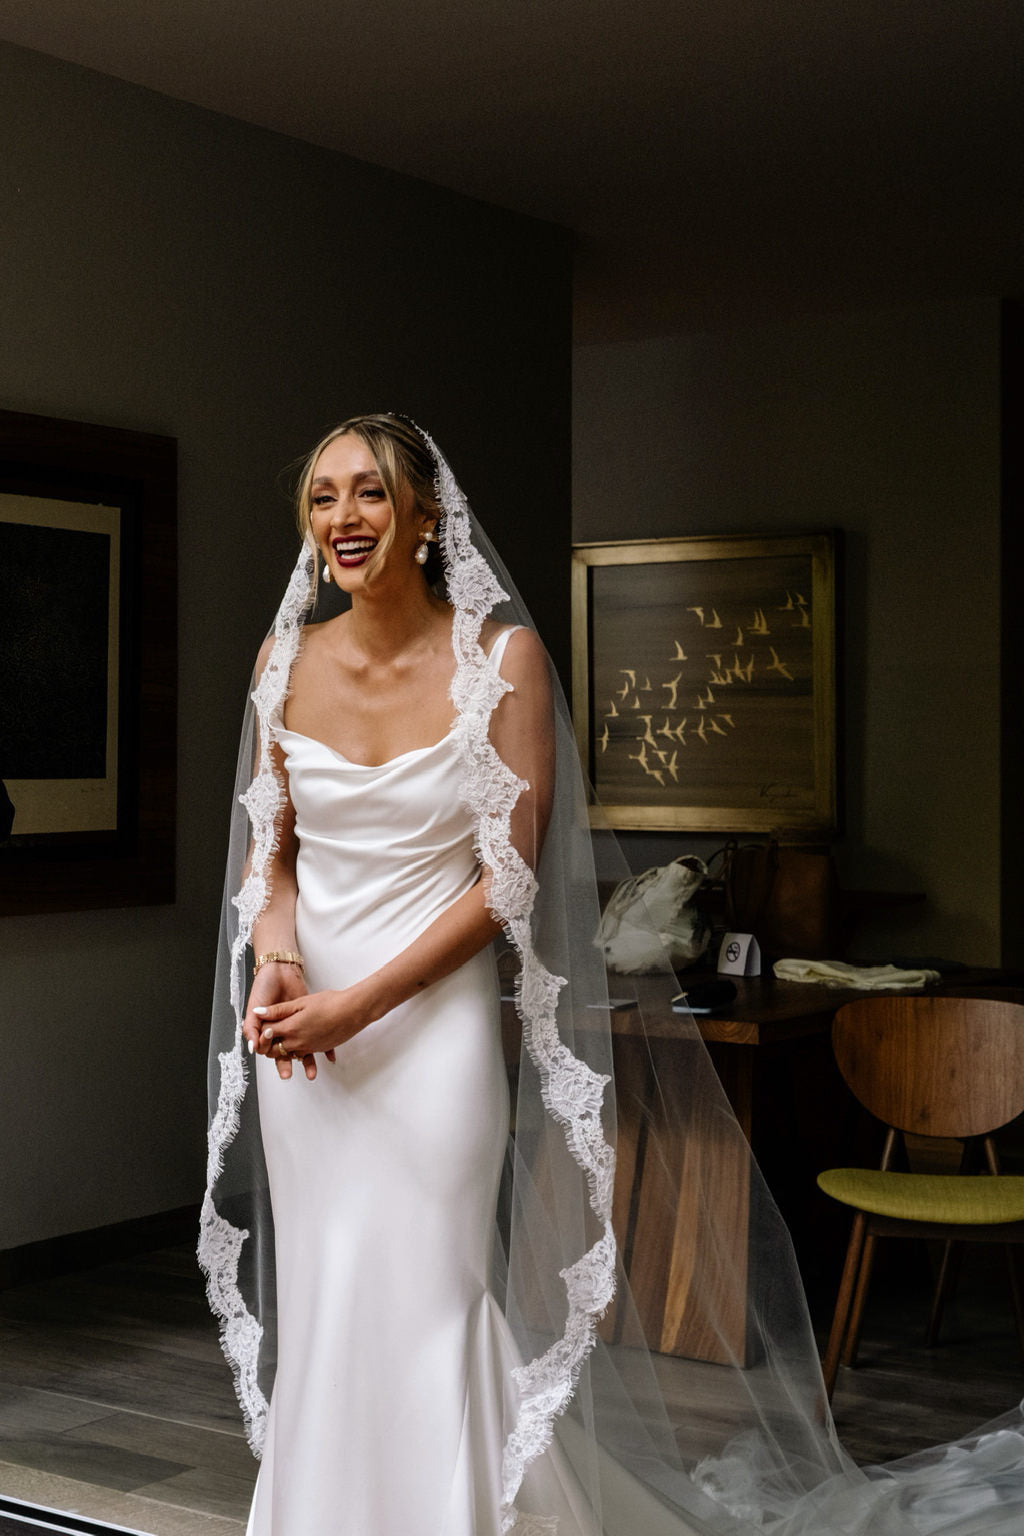 Long Cathedral Veil With Lace Edge Beaded French Alencon Lace